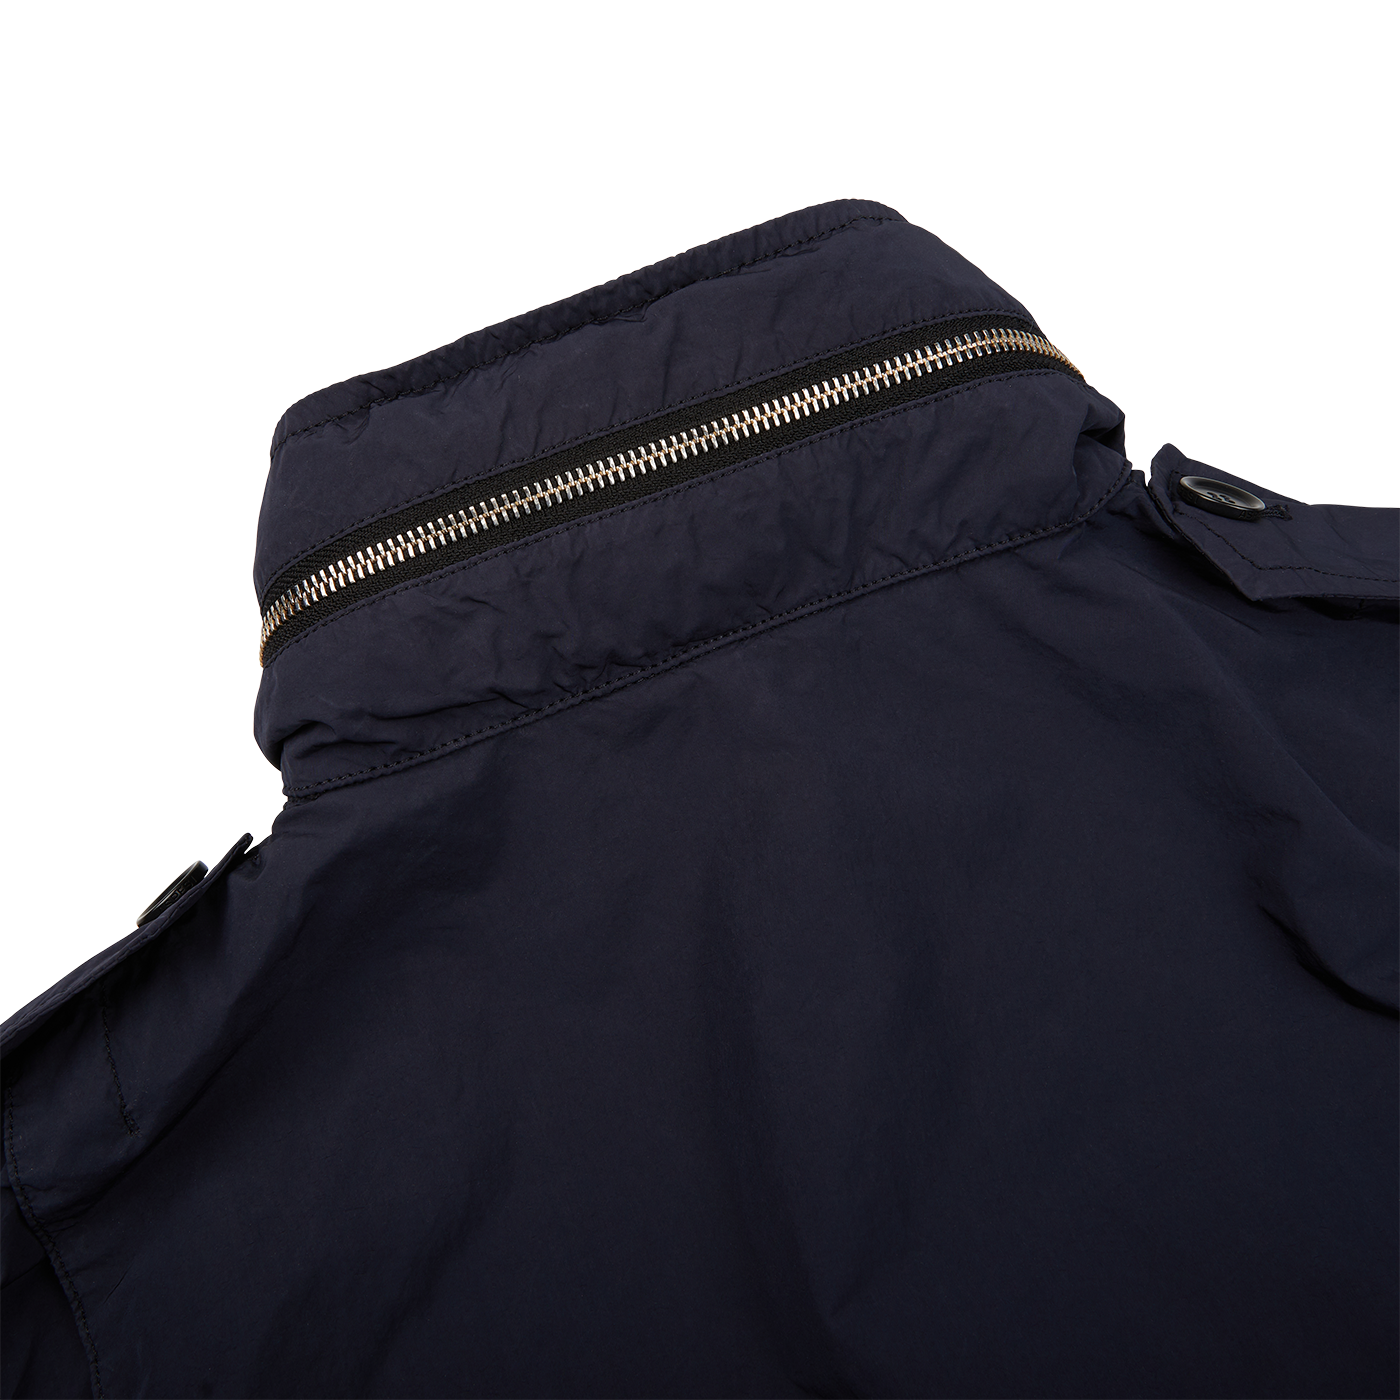 The Aspesi navy blue nylon taffeta M65 field jacket features zippers, perfect for outdoor activities in rain.